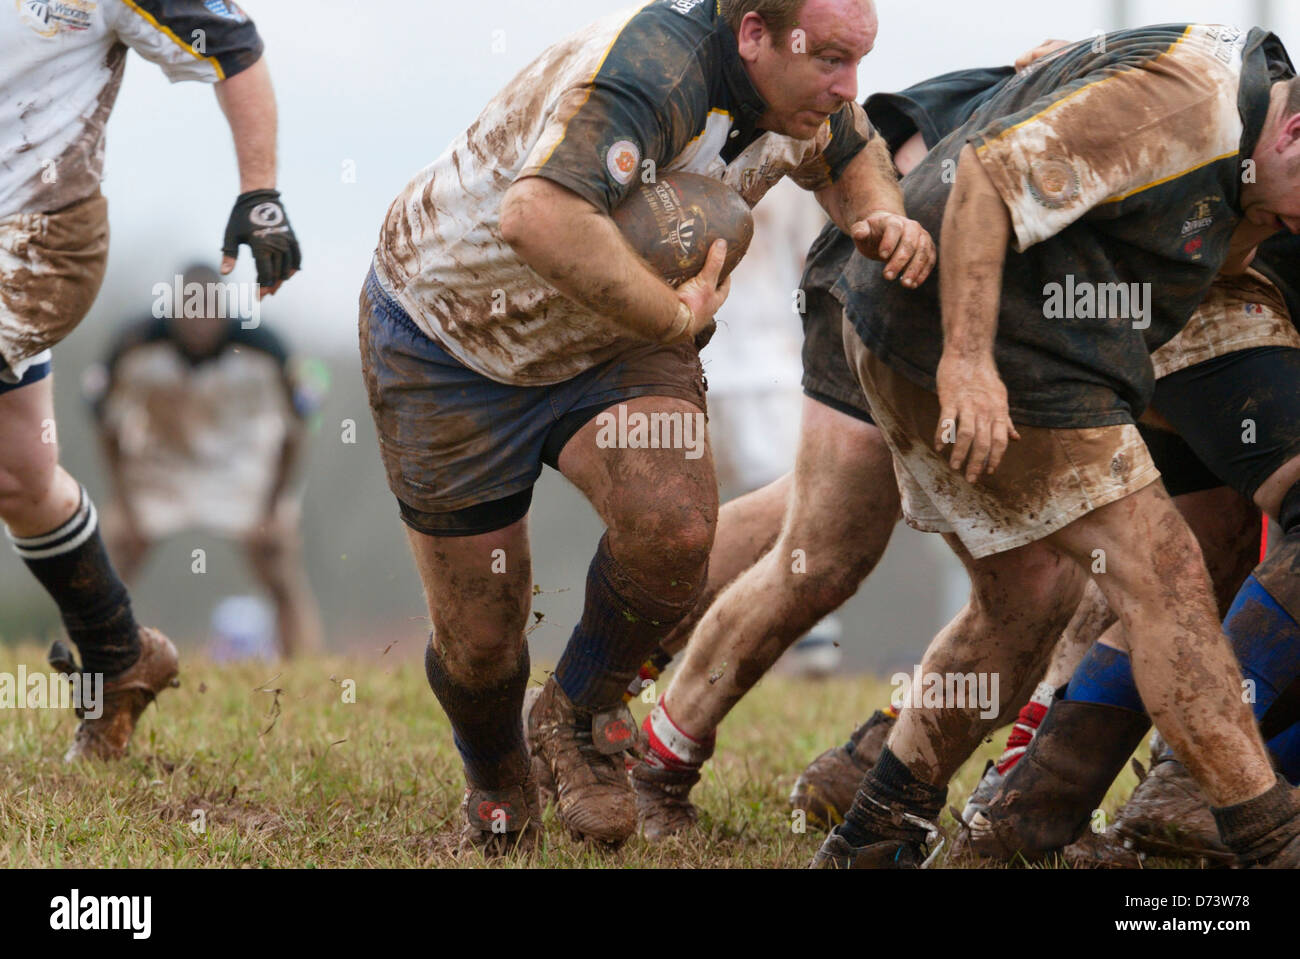 Teams compete in muddy conditions during the annual Cherry Blossom Rugby Tournament. Stock Photo